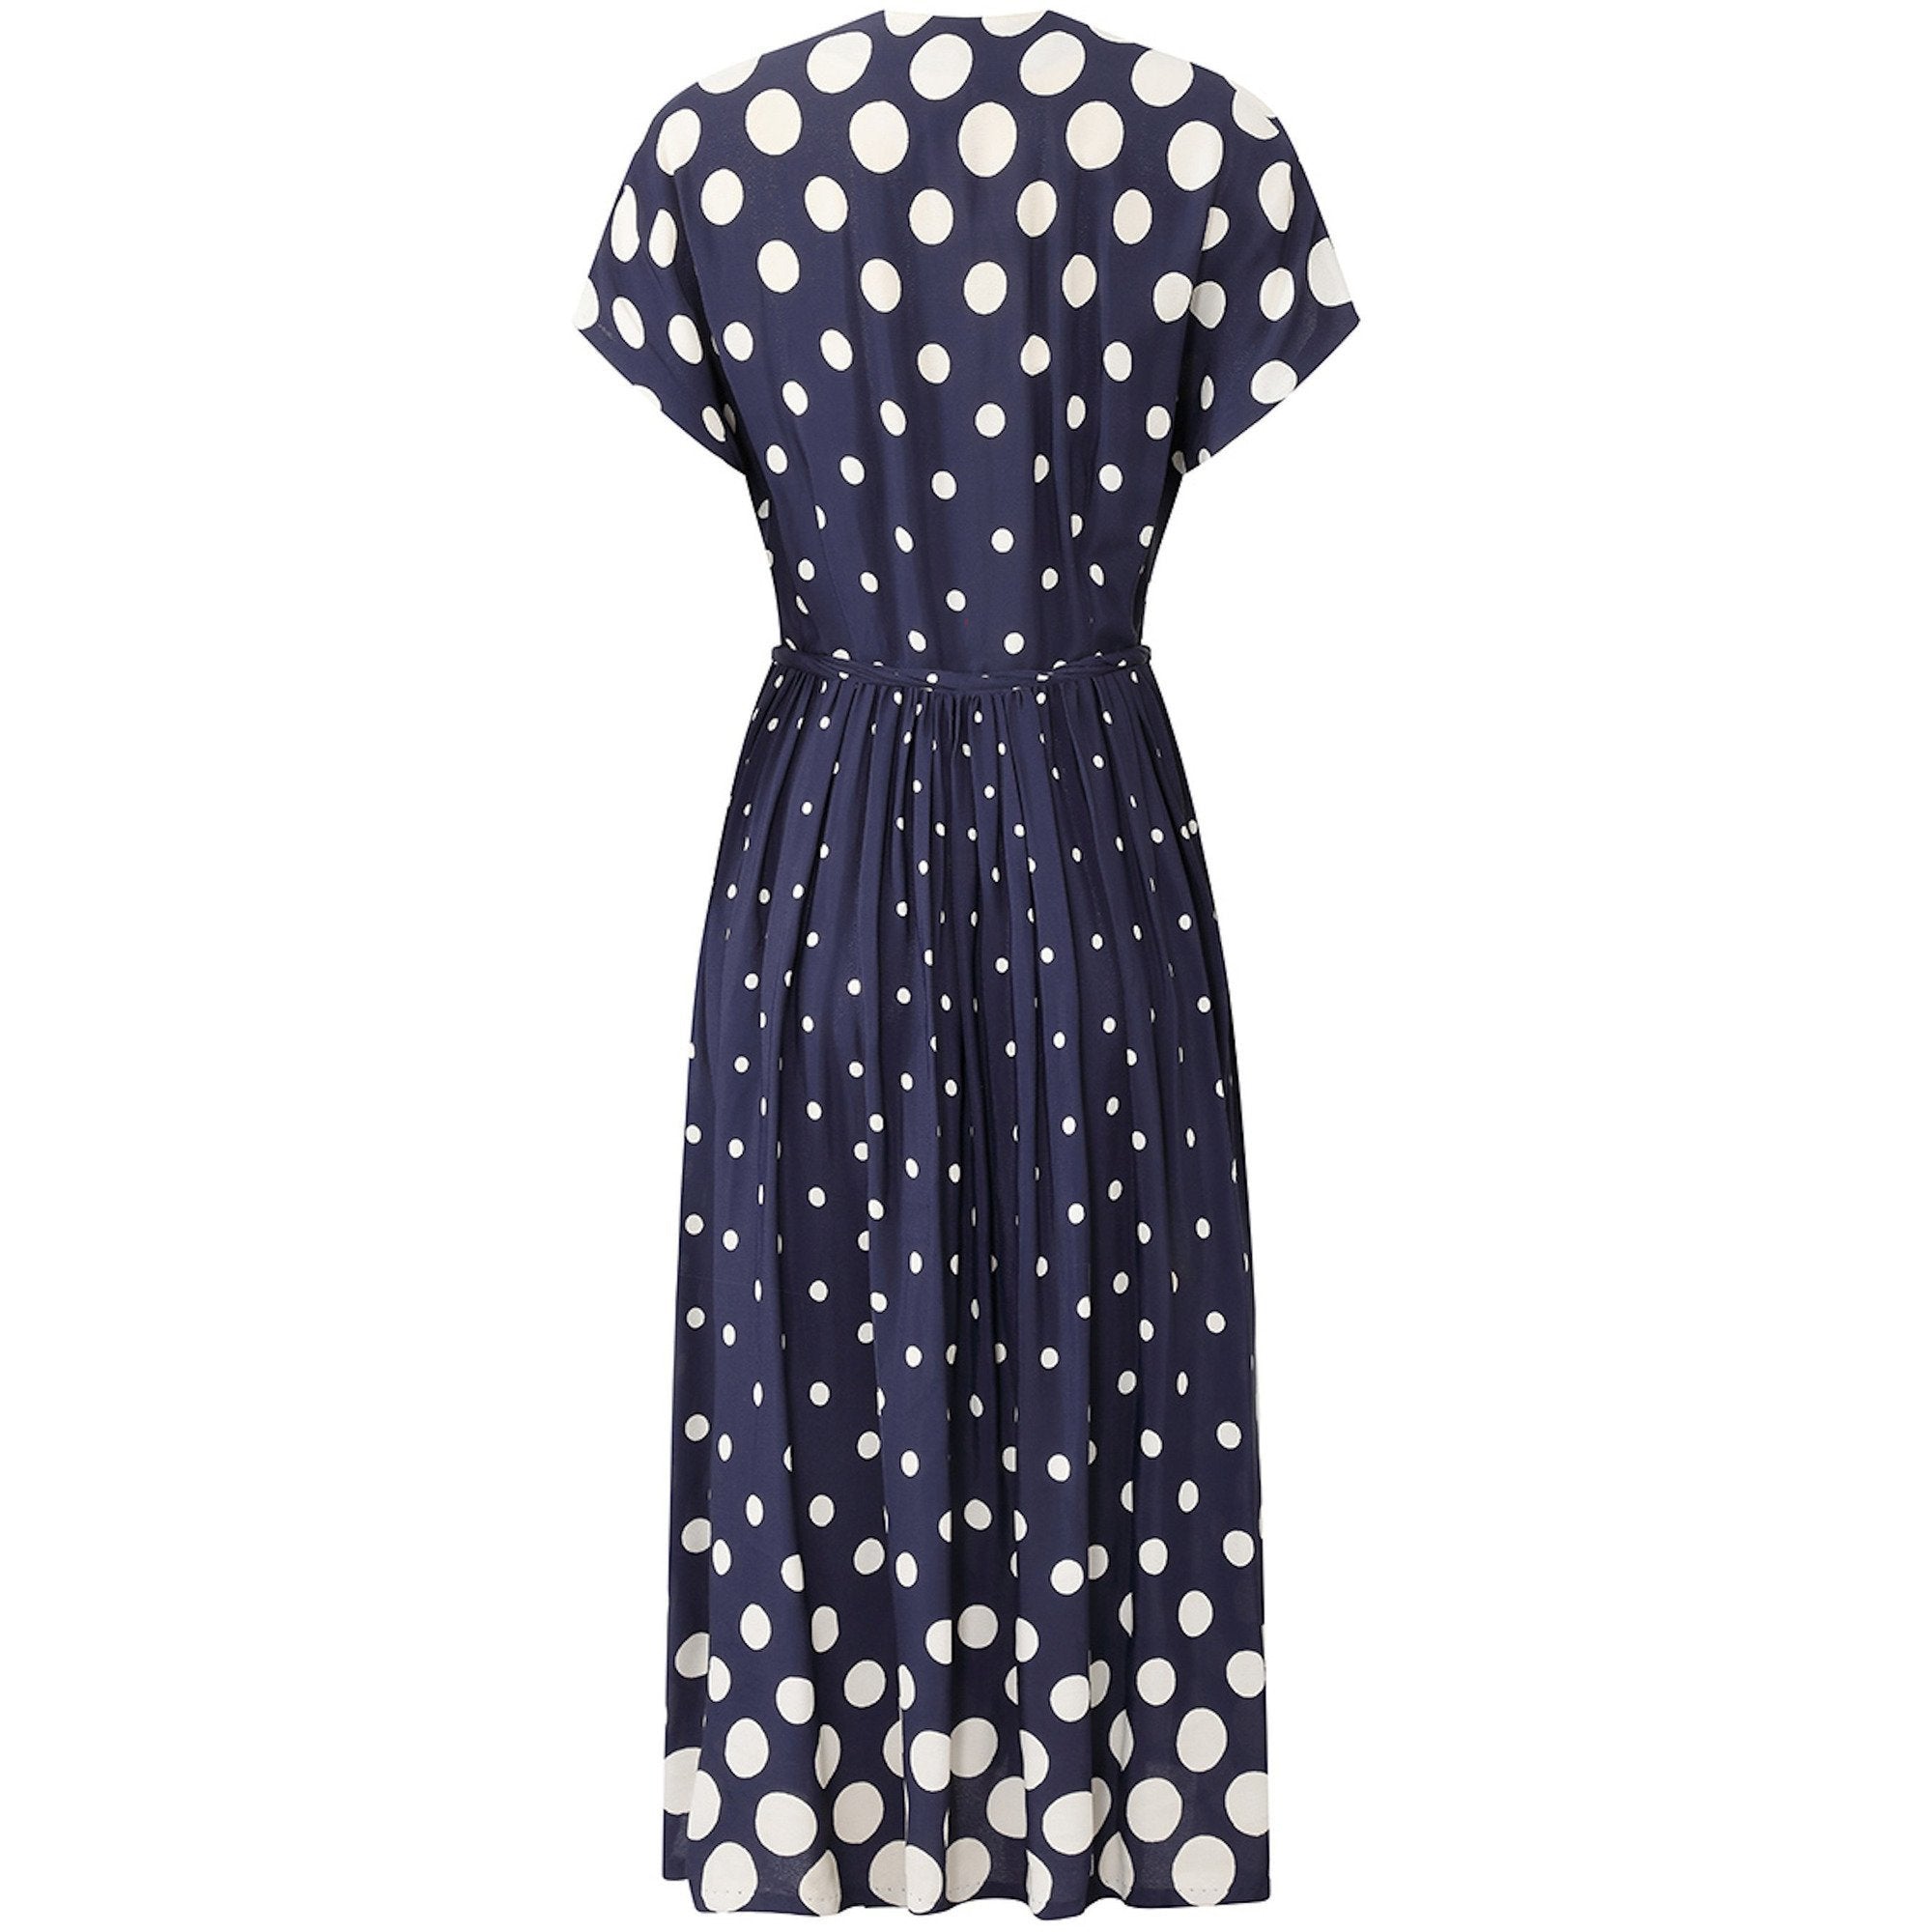 1940s Navy And White Polkadot Dress With Bow Detail and Waist Tie